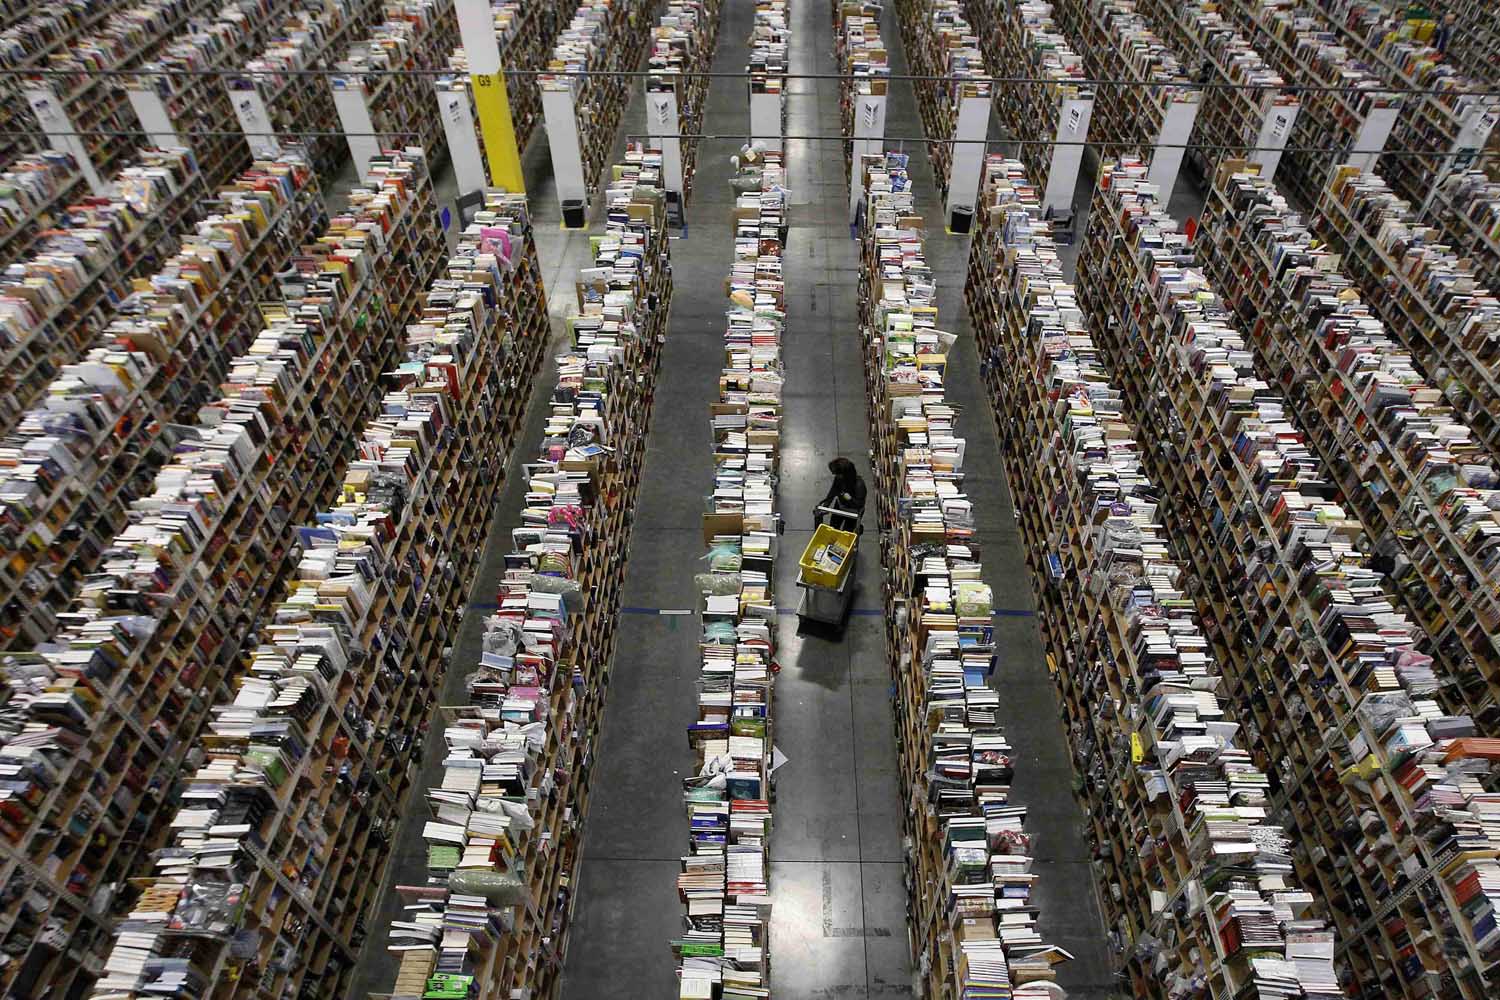 Worker gathers items for delivery at Amazon's distribution center in Phoenix